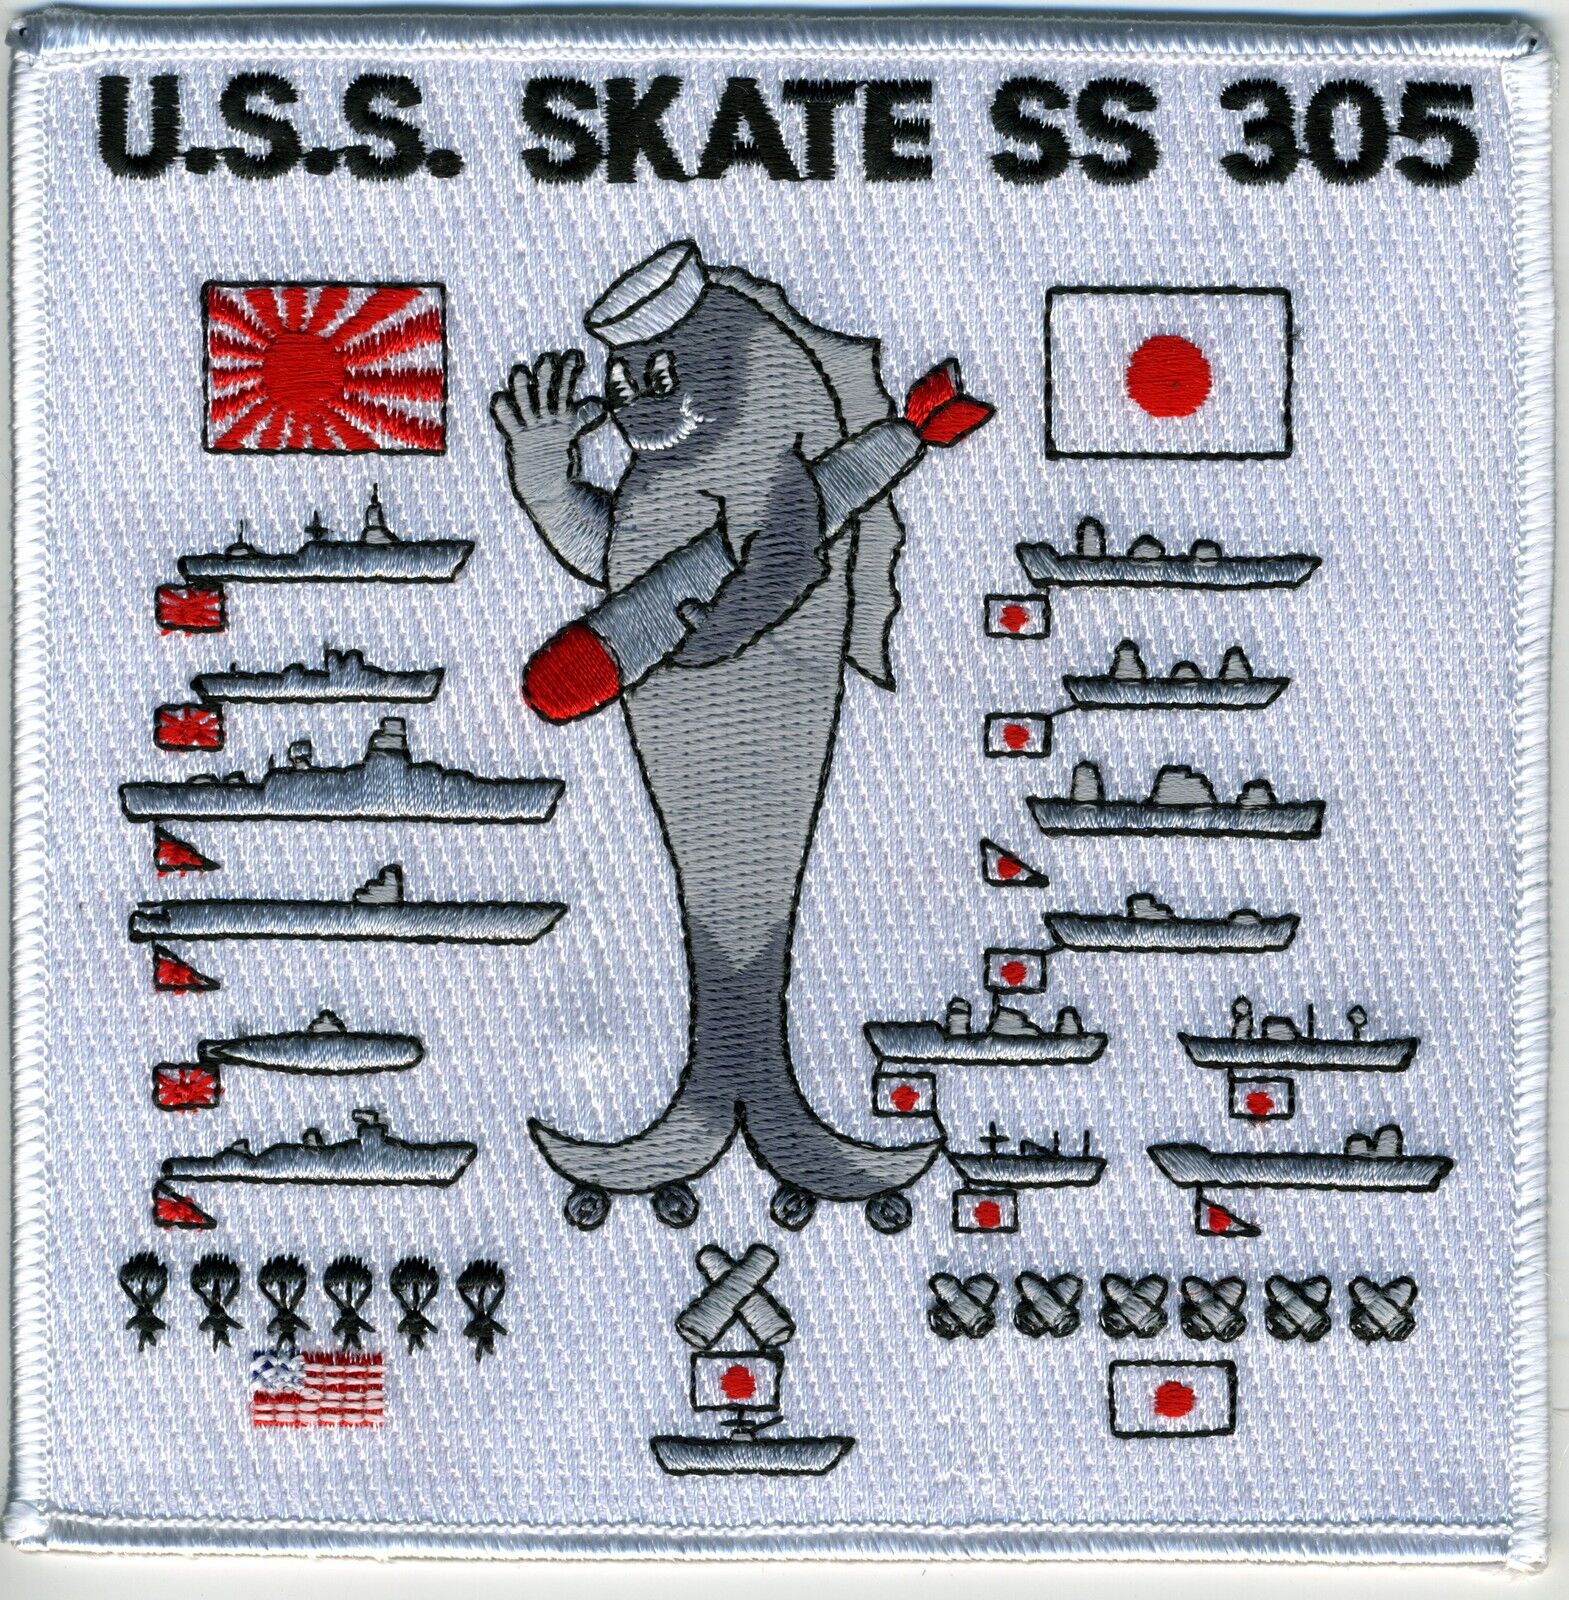 USS Skate SS 305 - WWII Battleflag BC Patch Cat No C5882